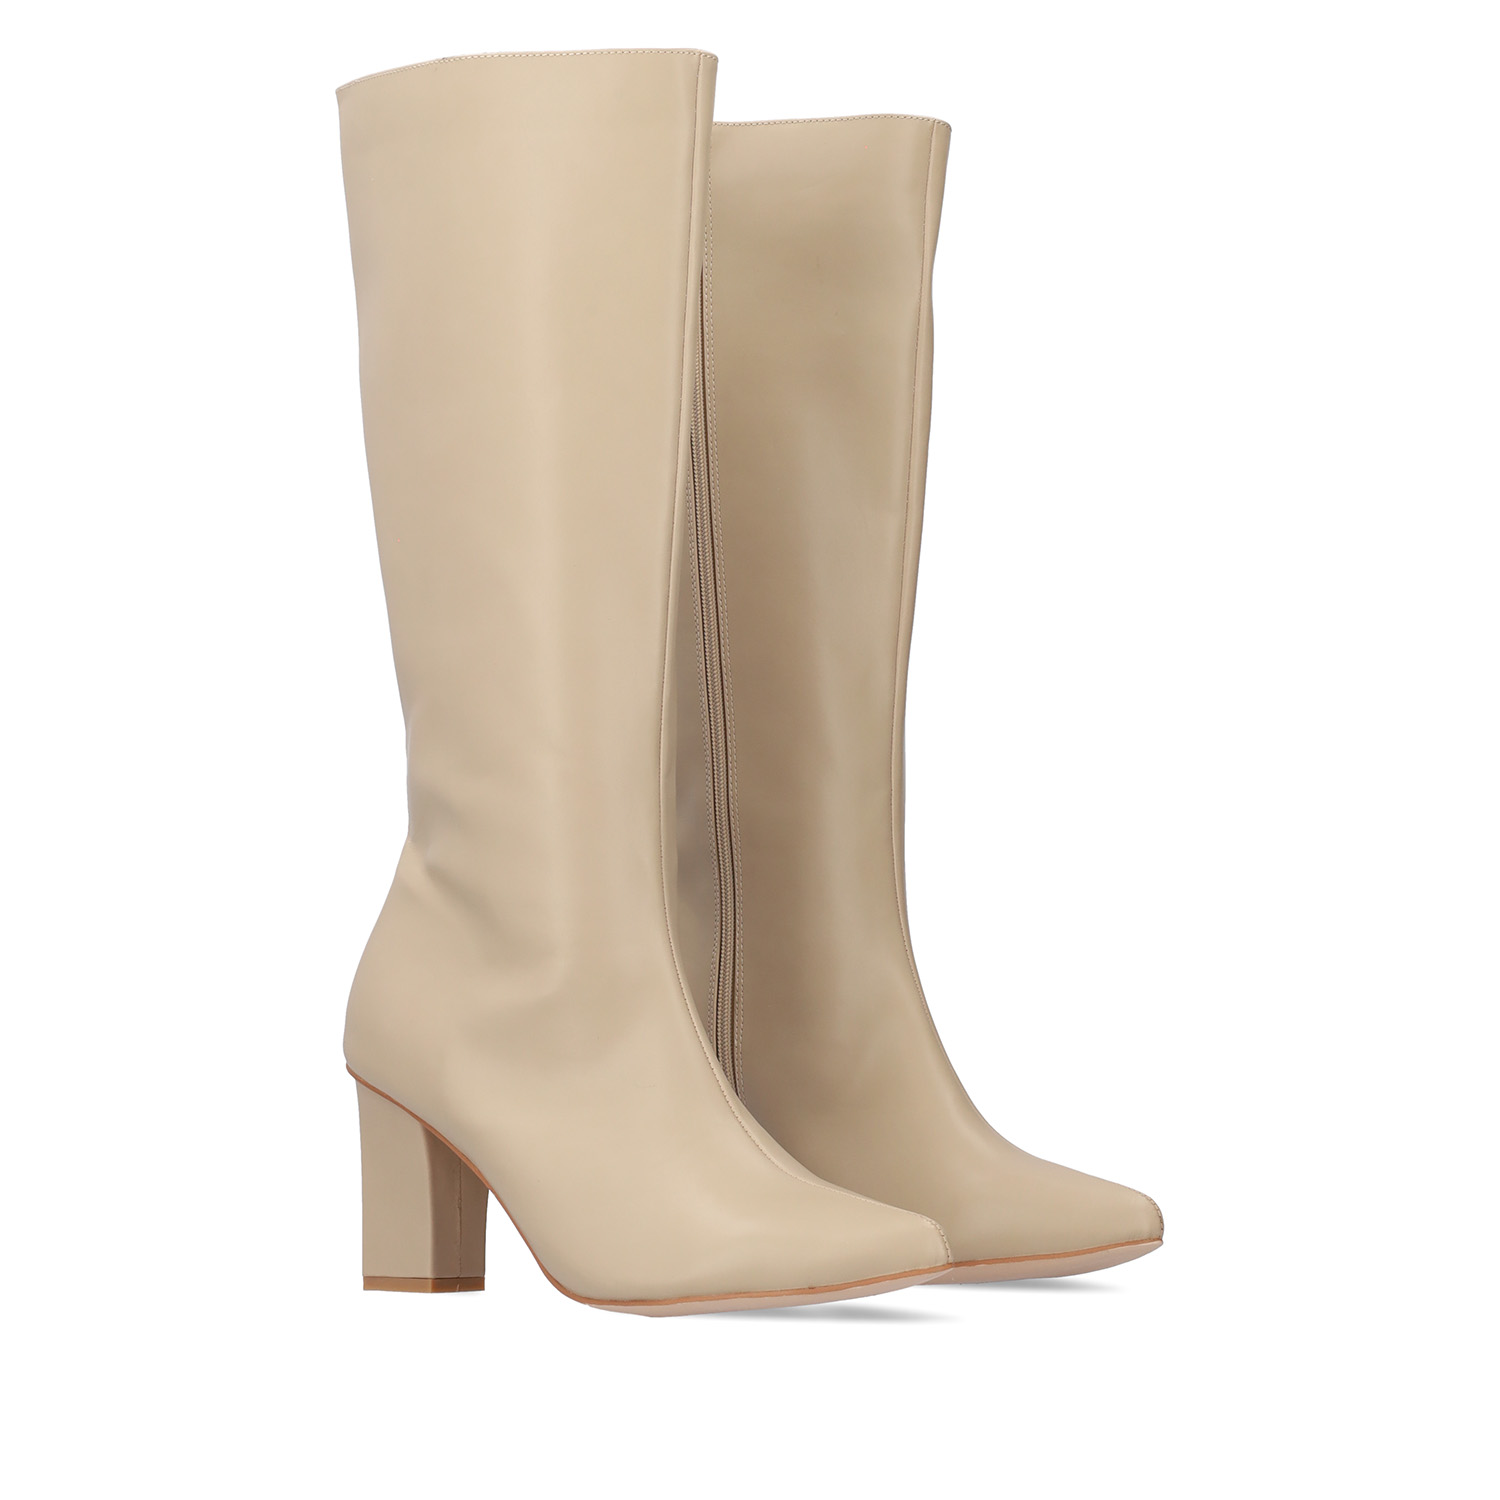 Smooth beige colored faux leather boots 